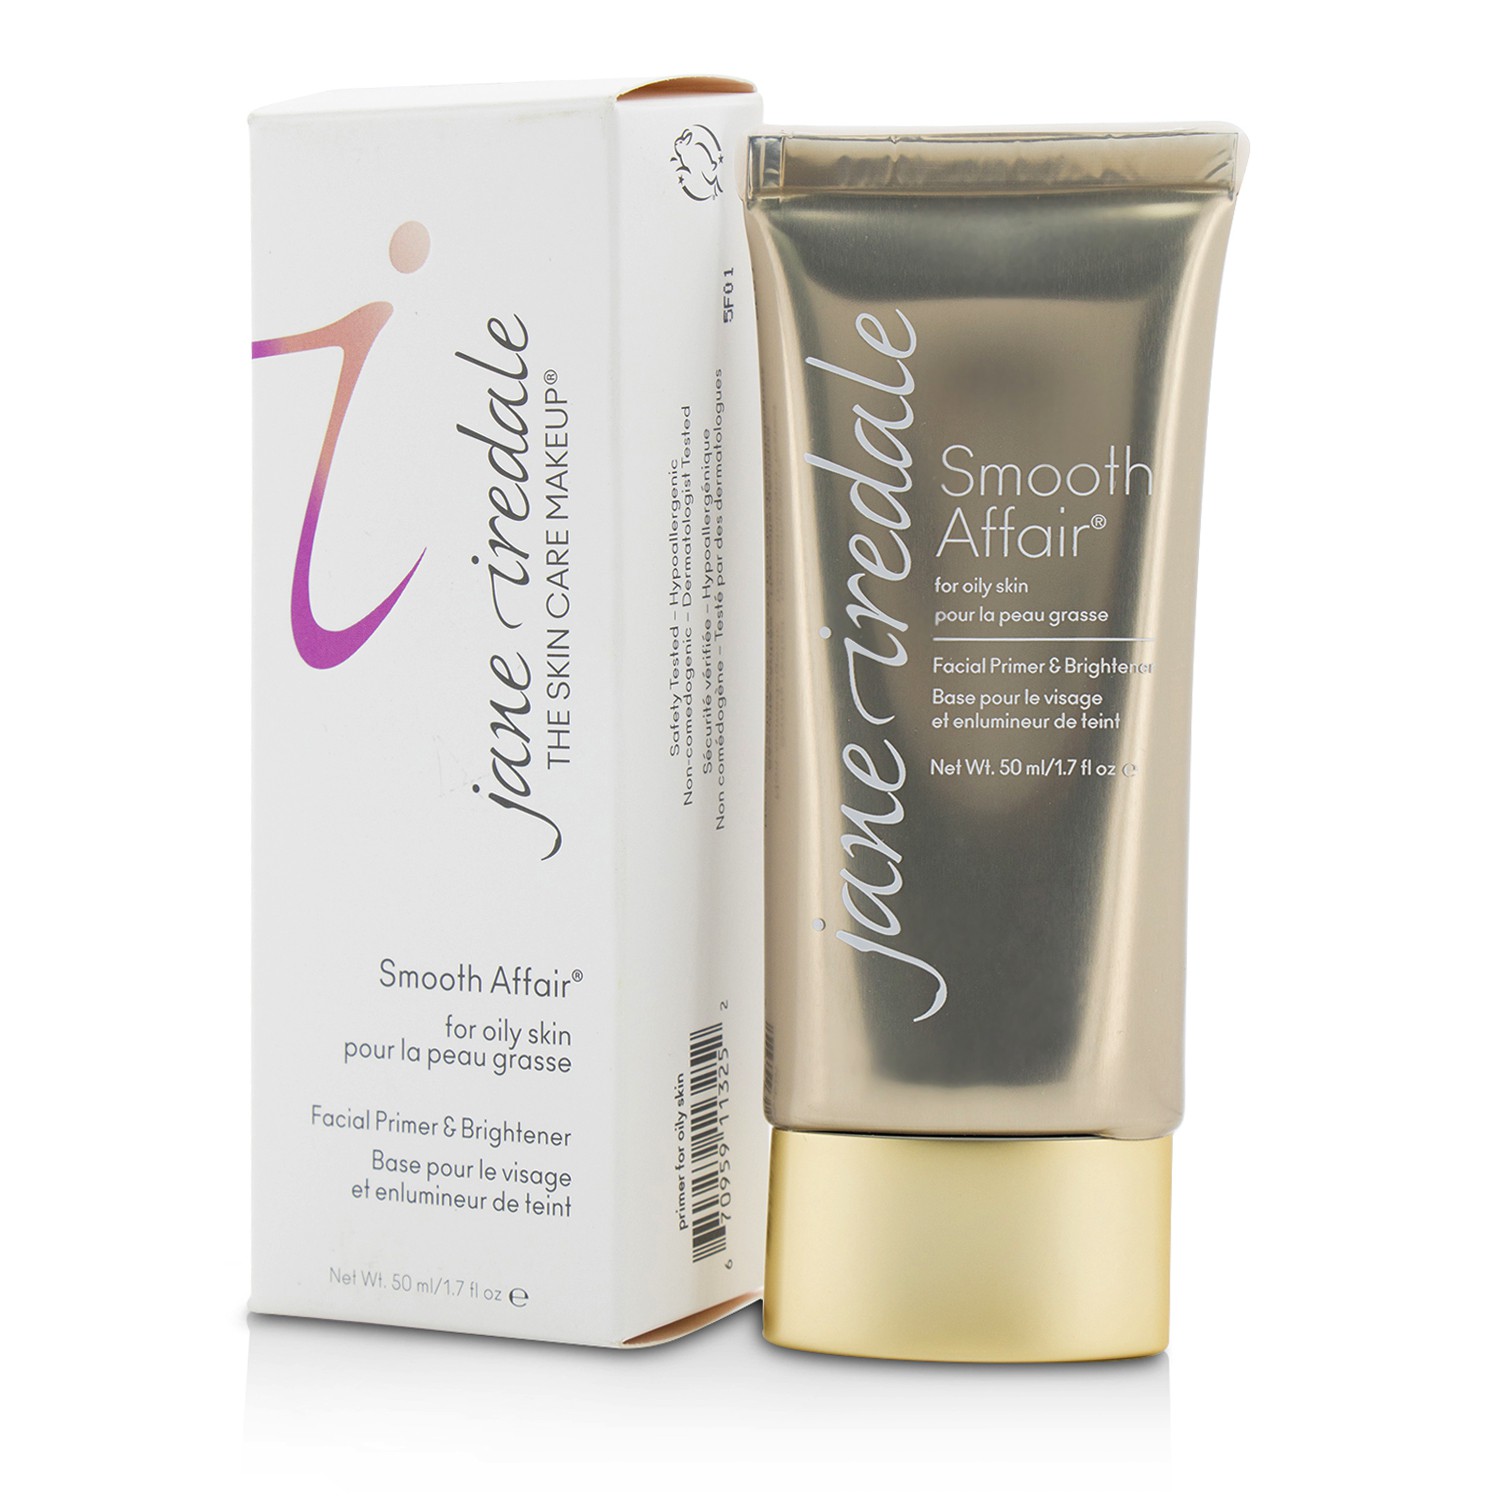 Smooth Affair Facial Primer & Brightener (For Oily Skin) Jane Iredale Image